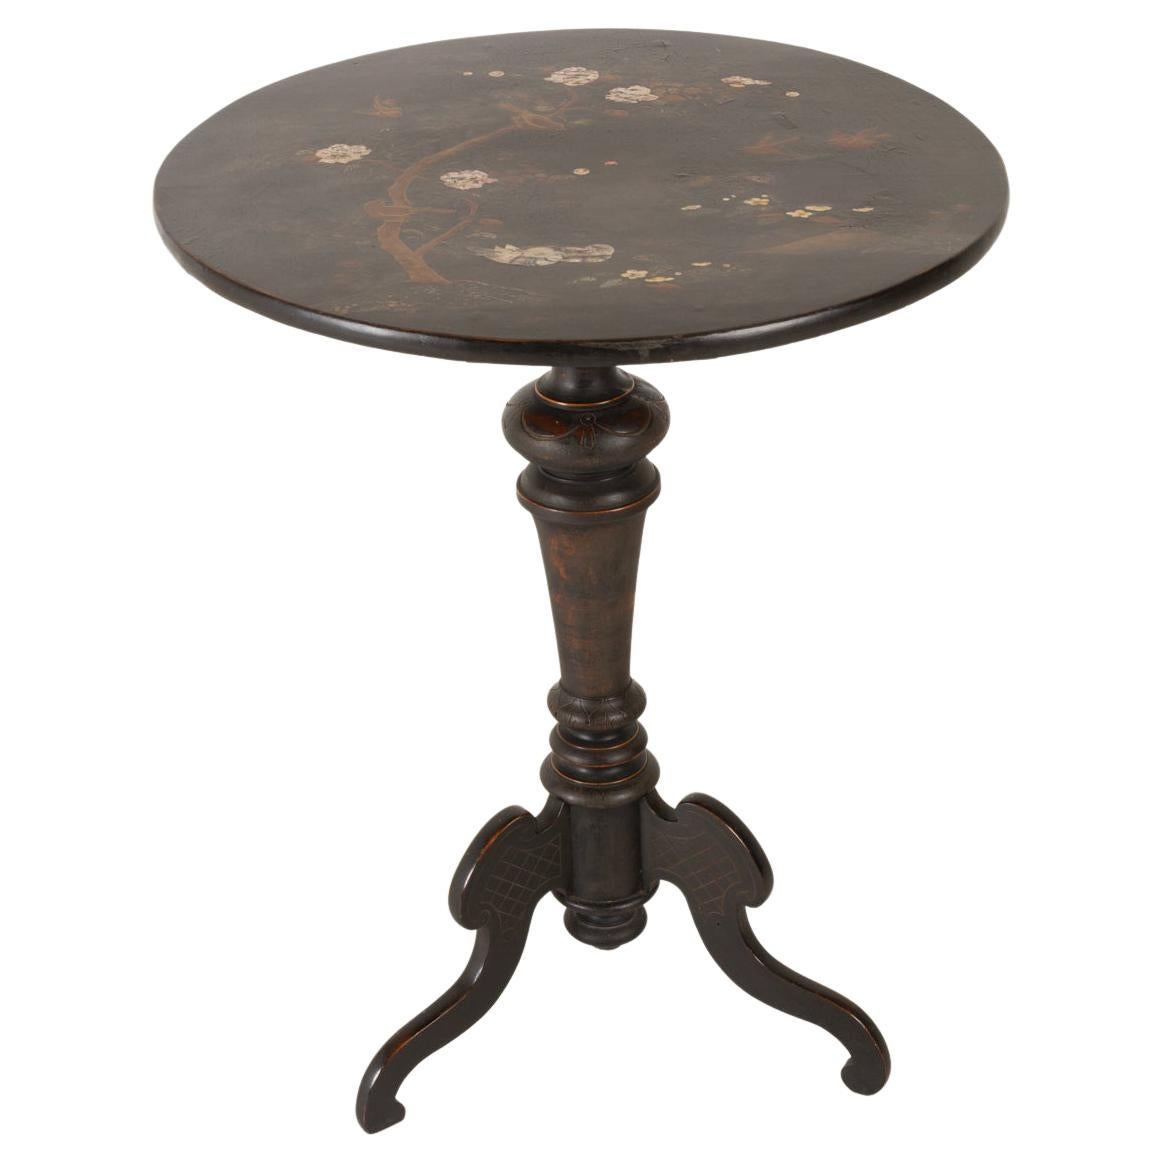 Antique Ebonized and Laquered Side Table, Late 1800s